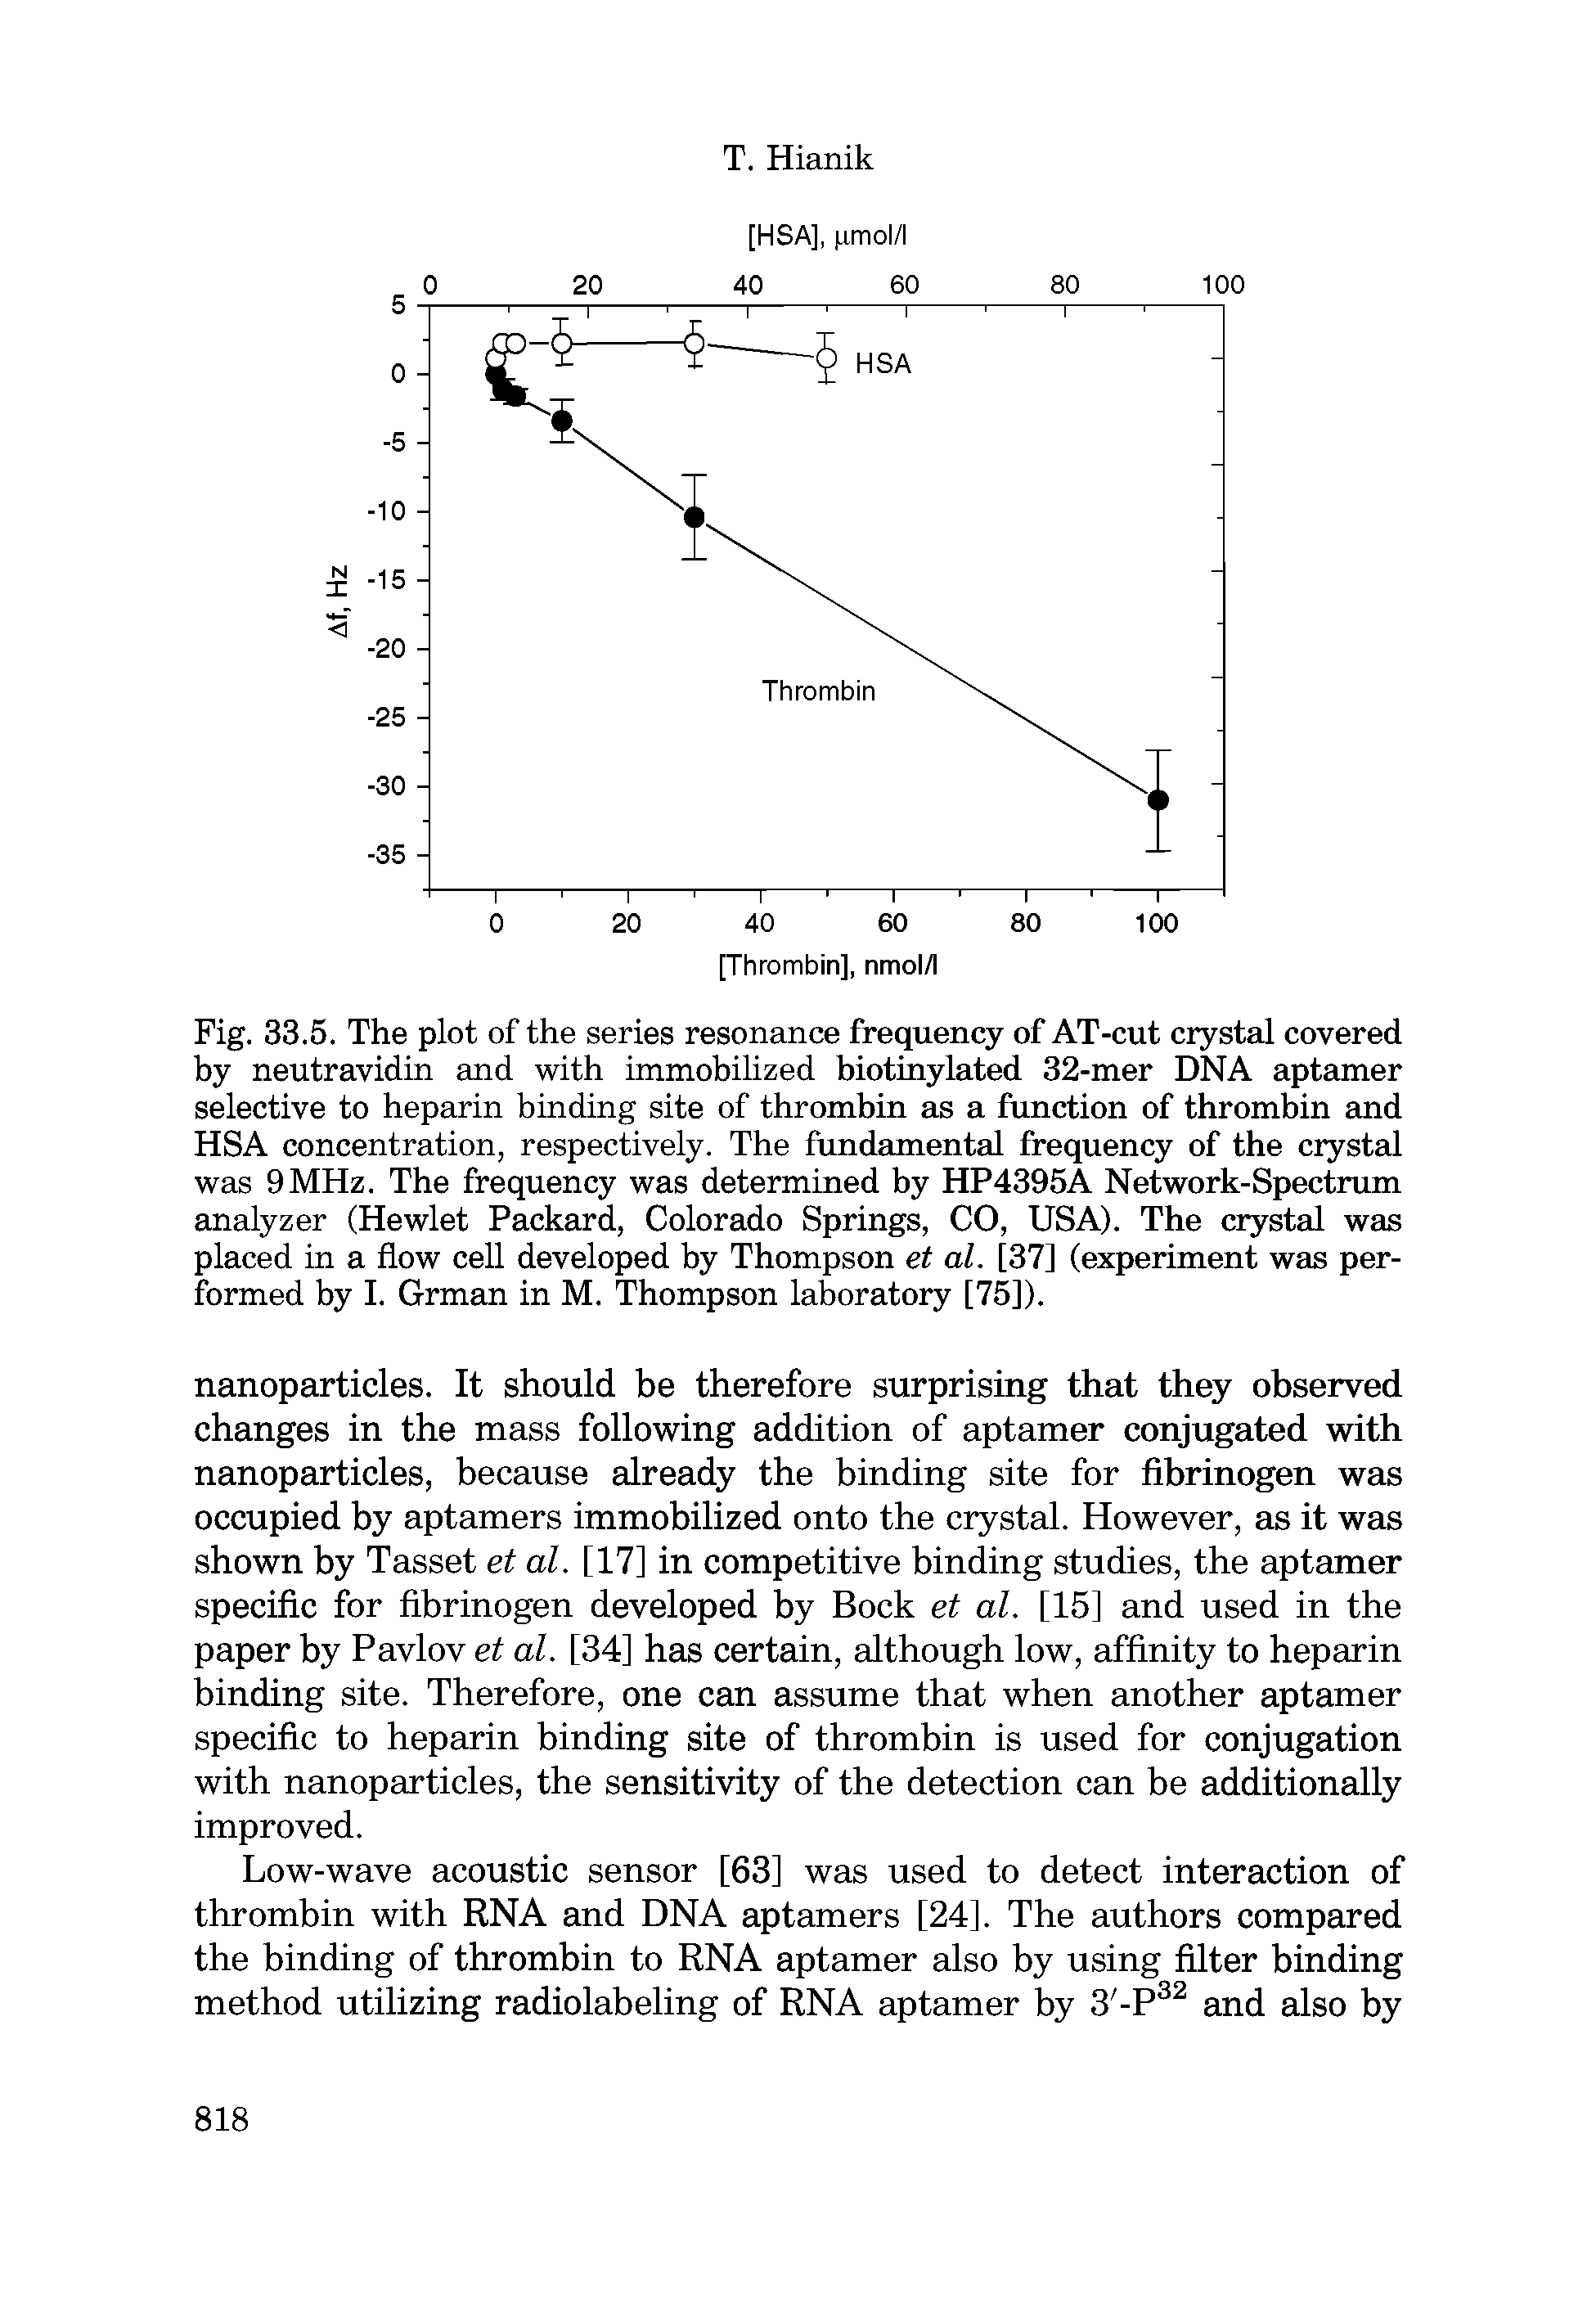 Fig. 33.5. The plot of the series resonance frequency of AT-cut crystal covered by neutravidin and with immobilized biotinylated 32-mer DNA aptamer selective to heparin binding site of thrombin as a function of thrombin and HSA concentration, respectively. The fundamental frequency of the crystal was 9MHz. The frequency was determined by HP4395A Network-Spectrum analyzer (Hewlet Packard, Colorado Springs, CO, USA). The crystal was placed in a flow cell developed by Thompson et al. [37] (experiment was performed by I. Grman in M. Thompson laboratory [75]).